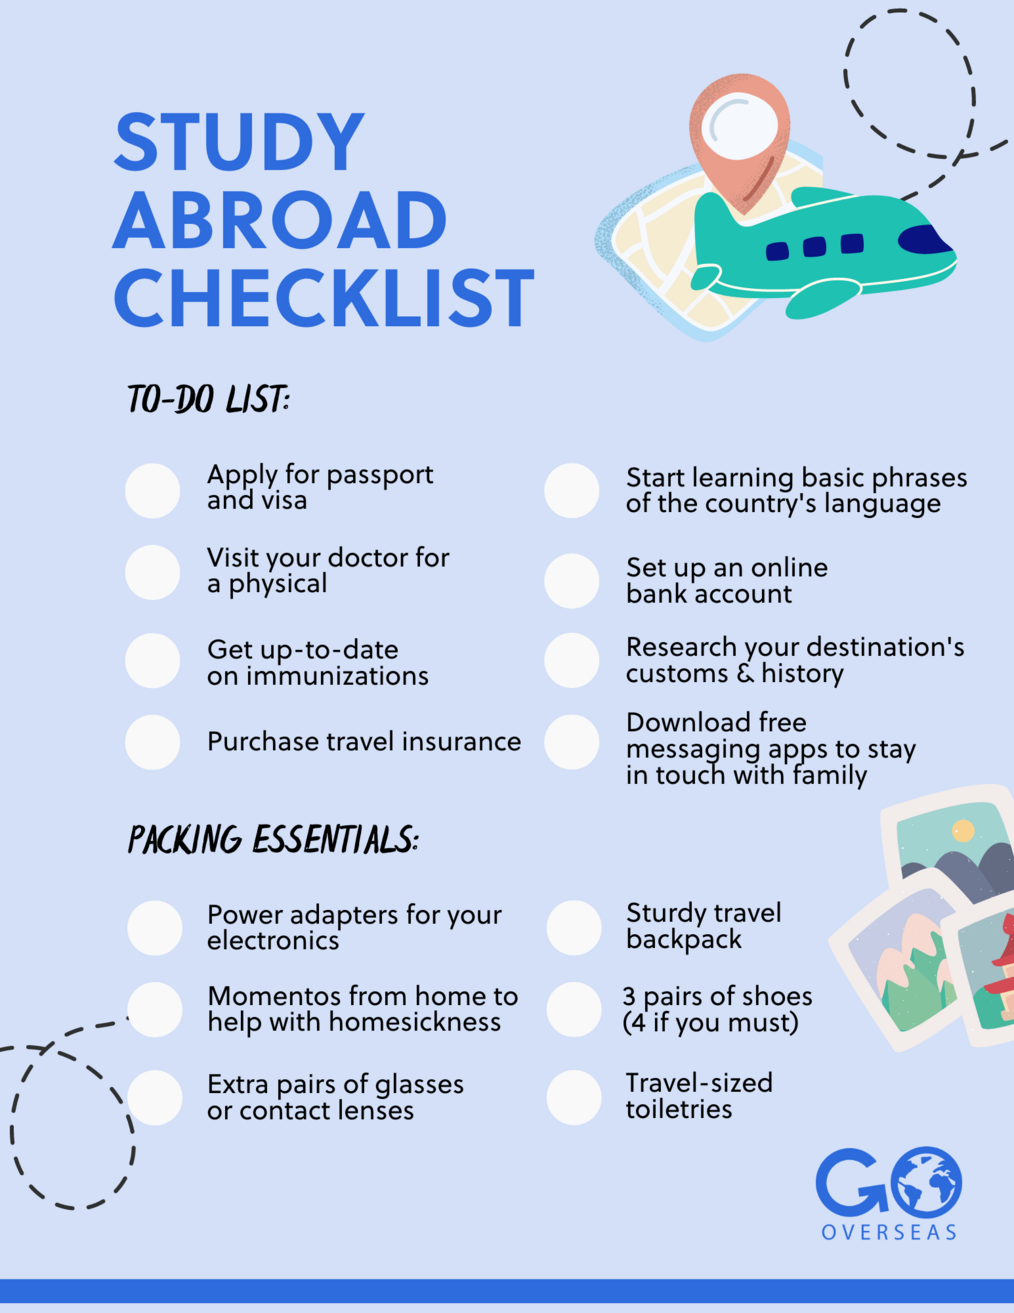 4 Tips to Use Video: Extending Study Abroad to your Classroom